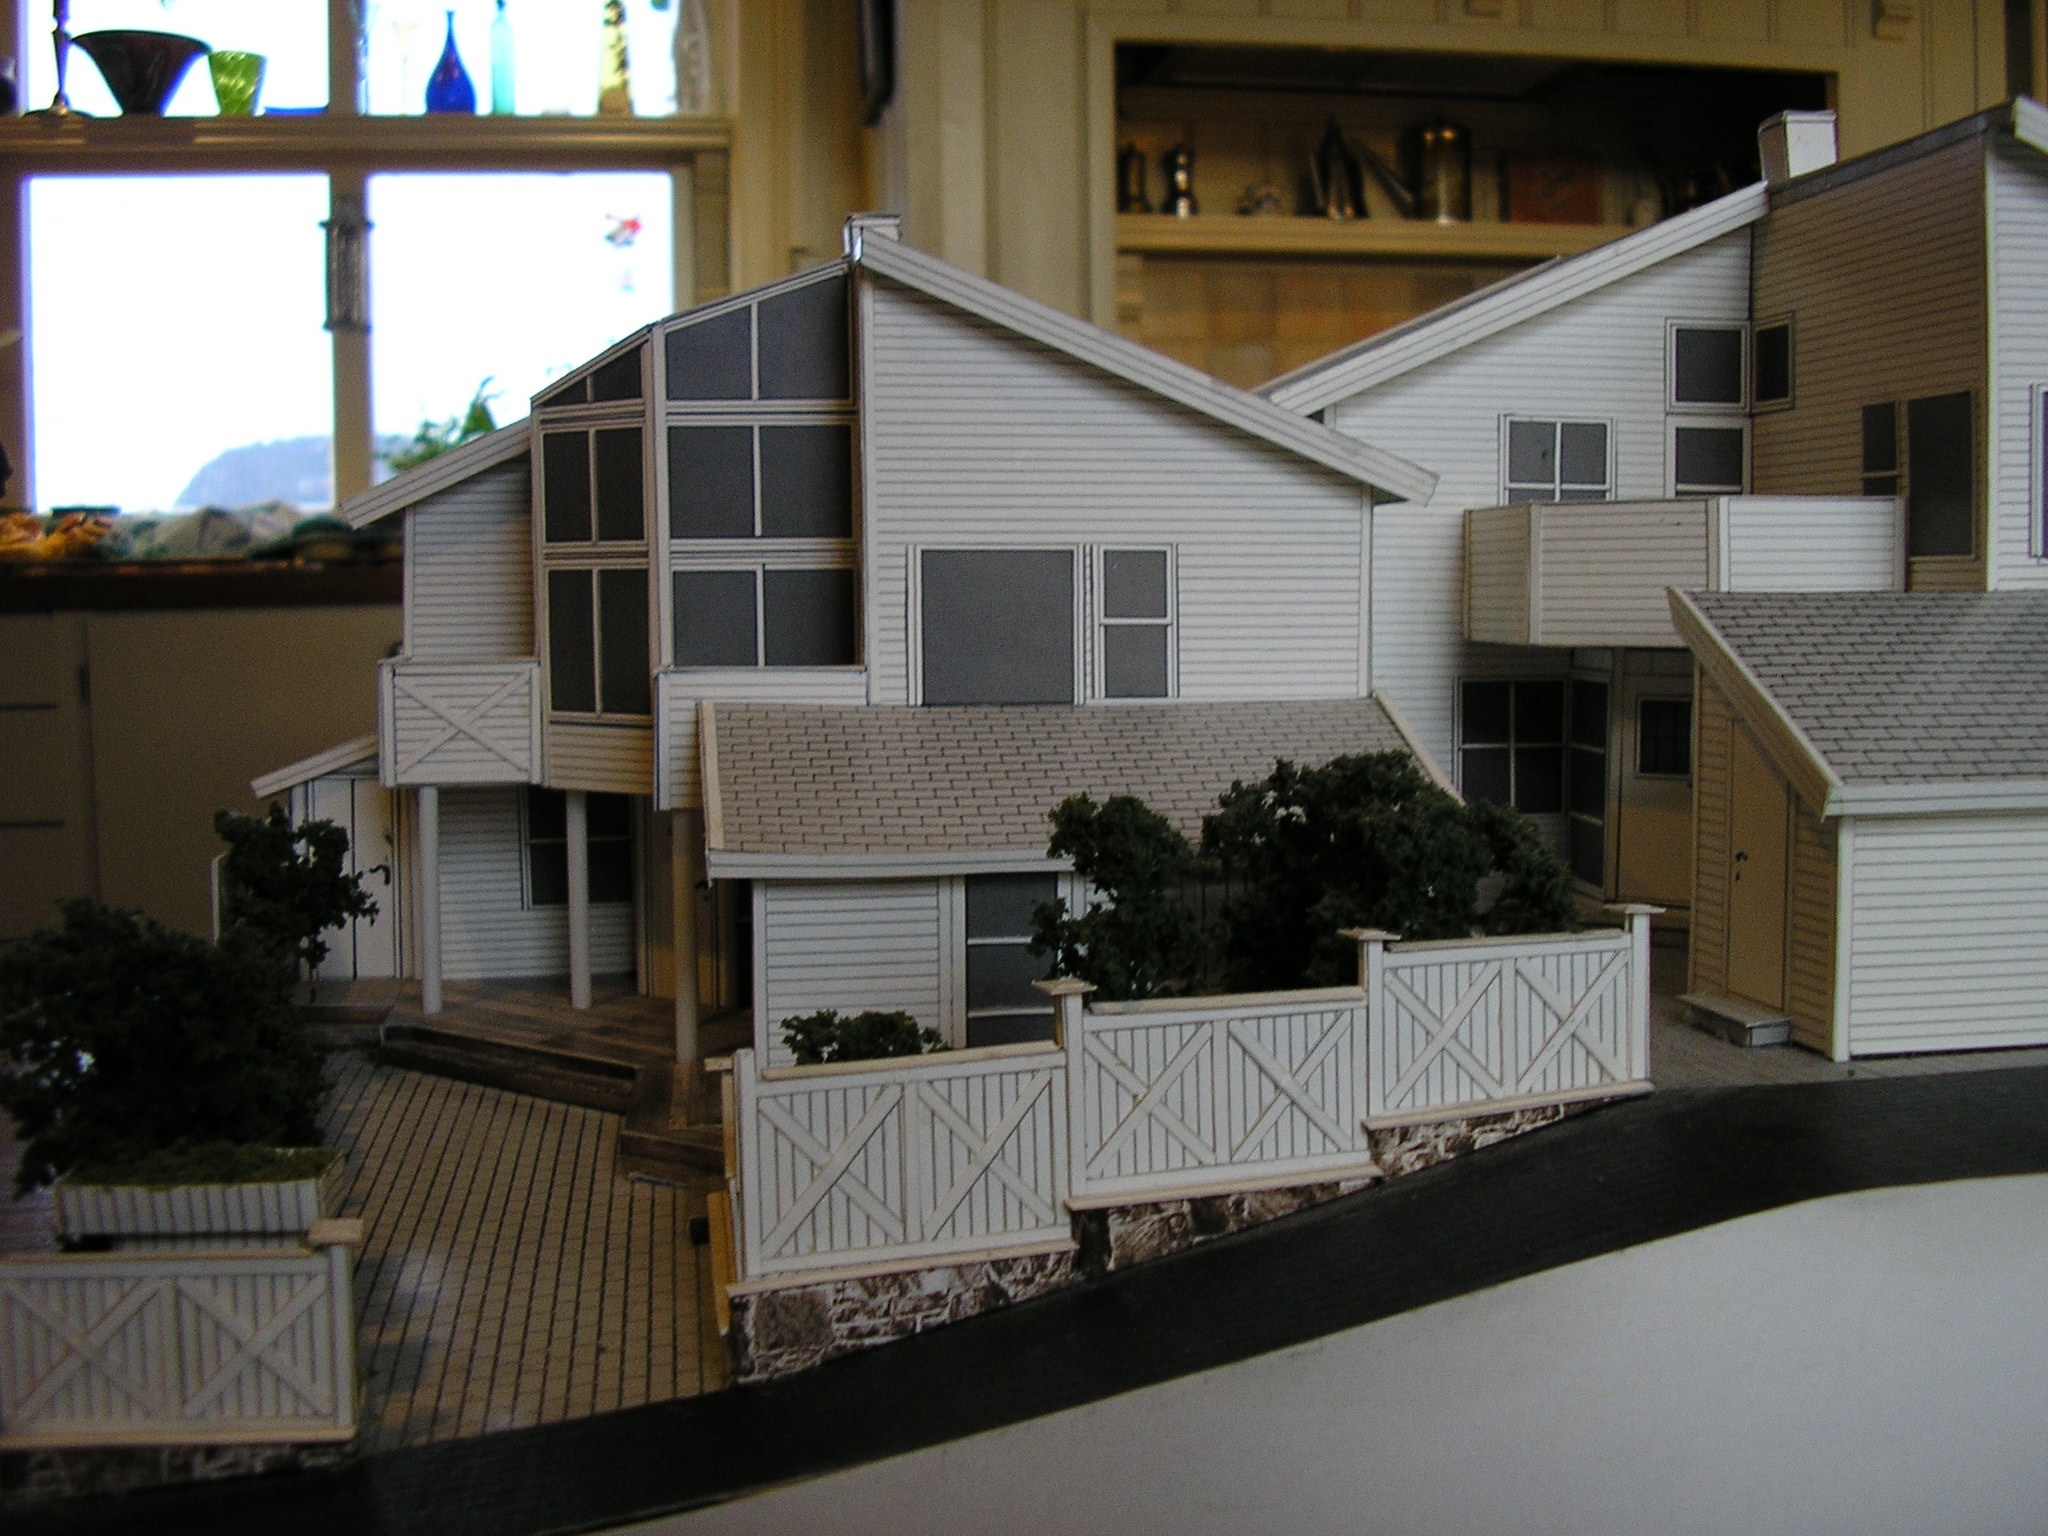 Model of home in Norway w/ sunspace addition